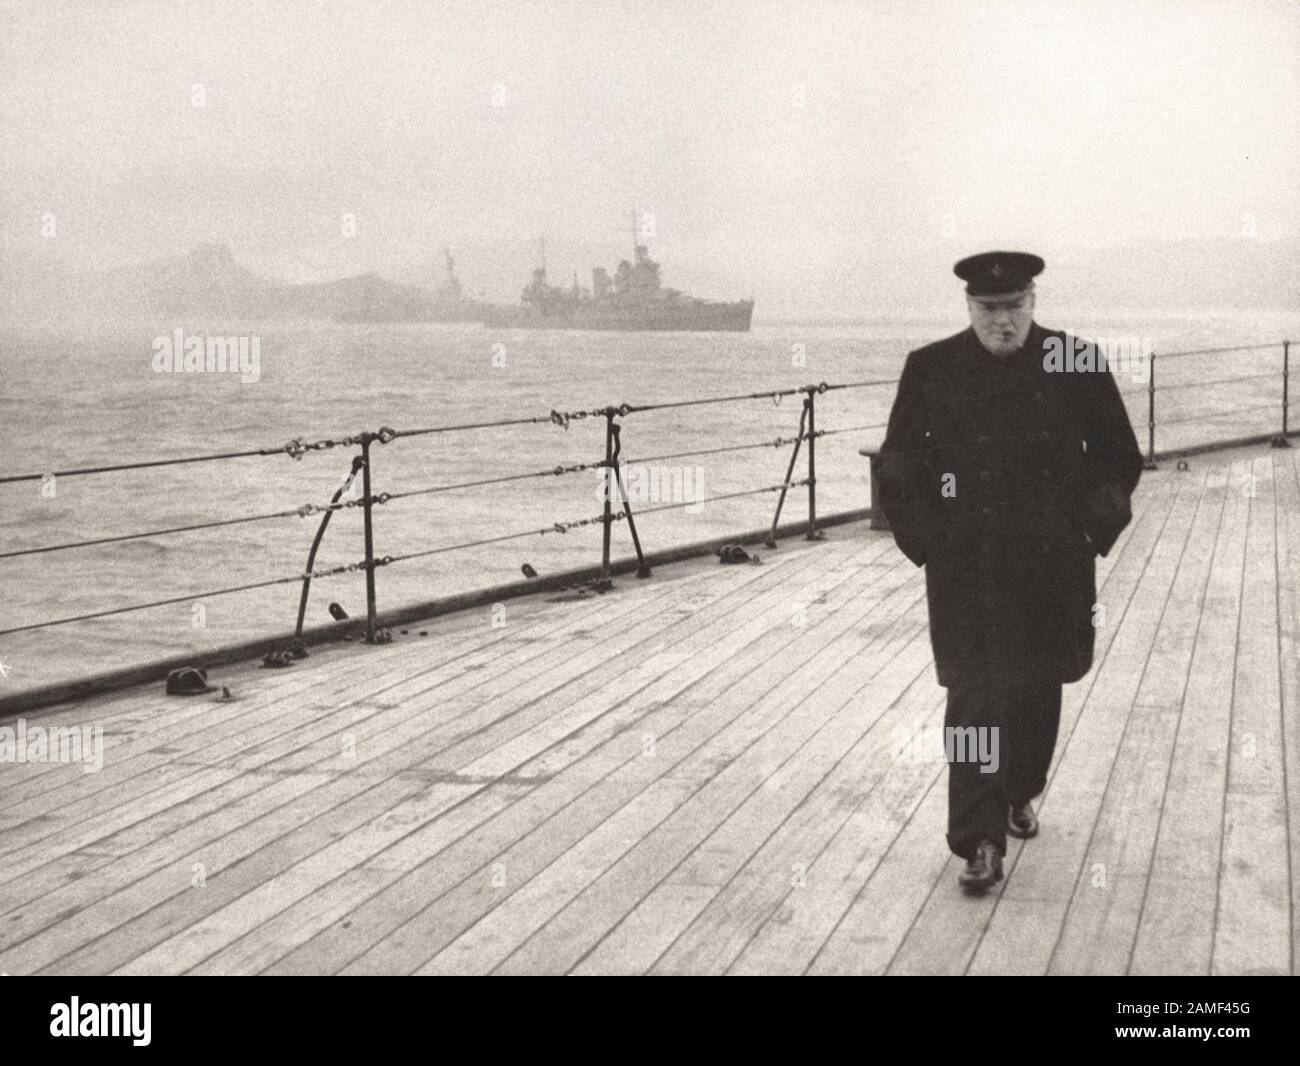 Winston Churchill on board the battleship HMS Prince of Wales during his journey to America to meet President Roosevelt, August 1941. Stock Photo